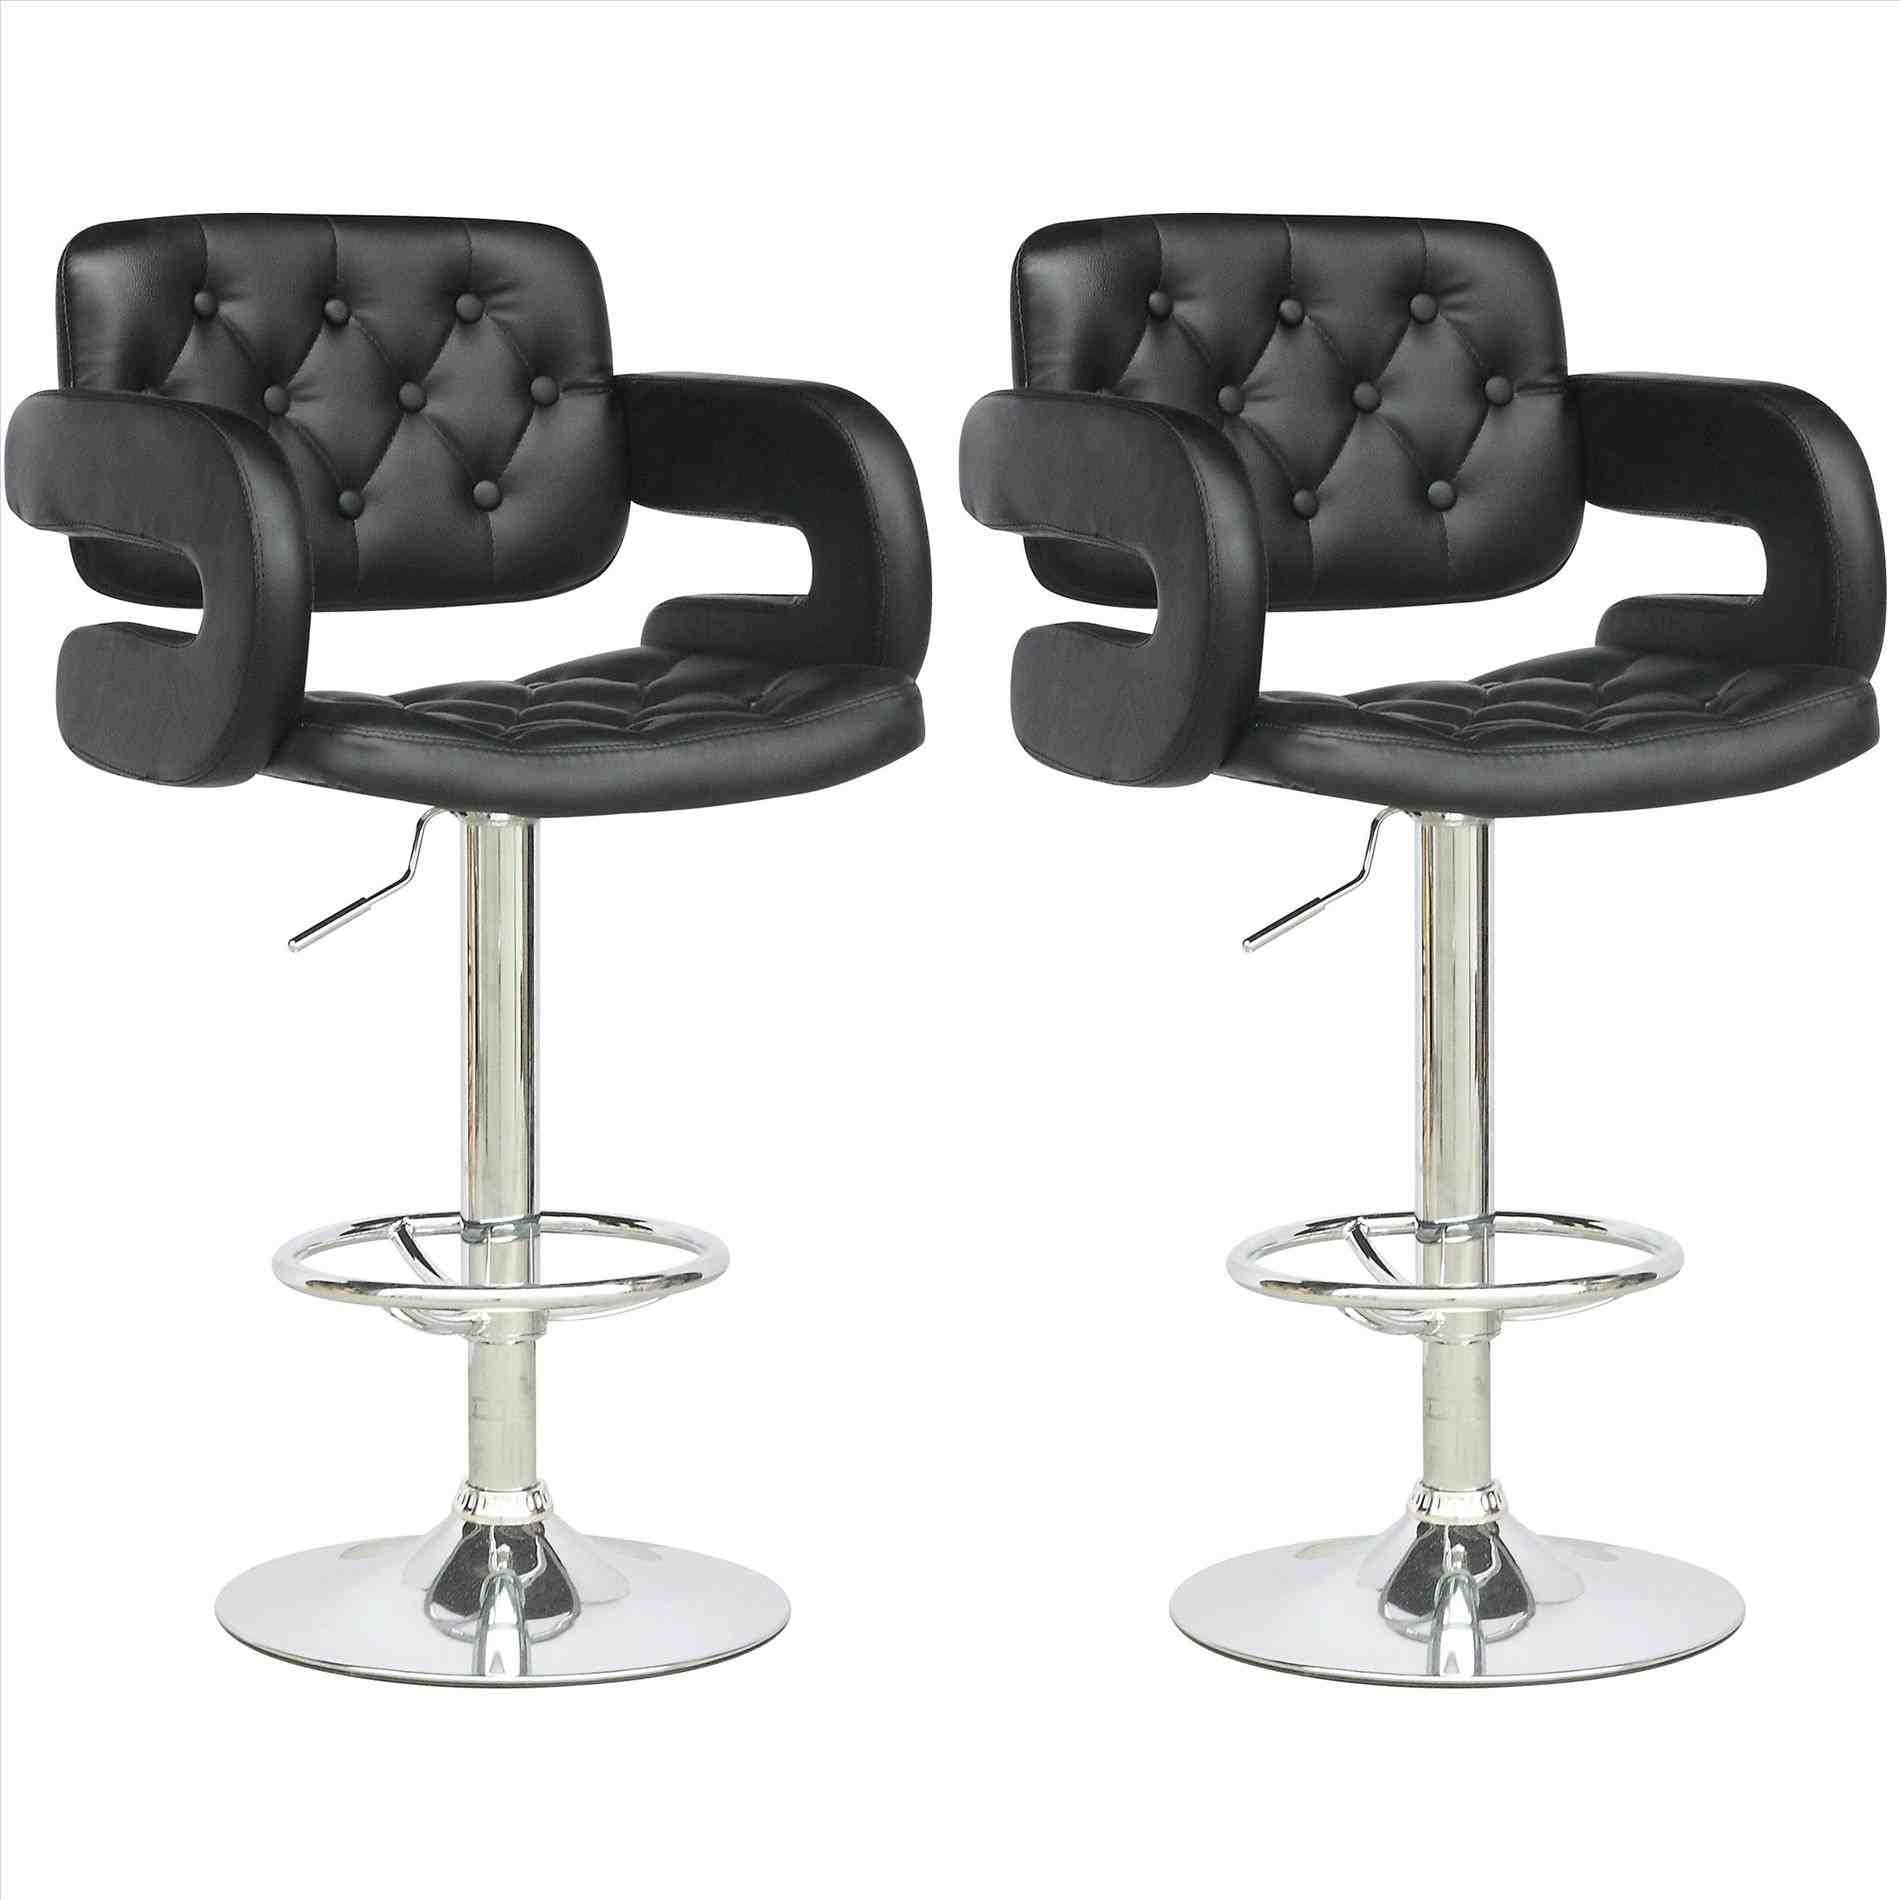 Adjustable Bar Stools with Backs and Arms